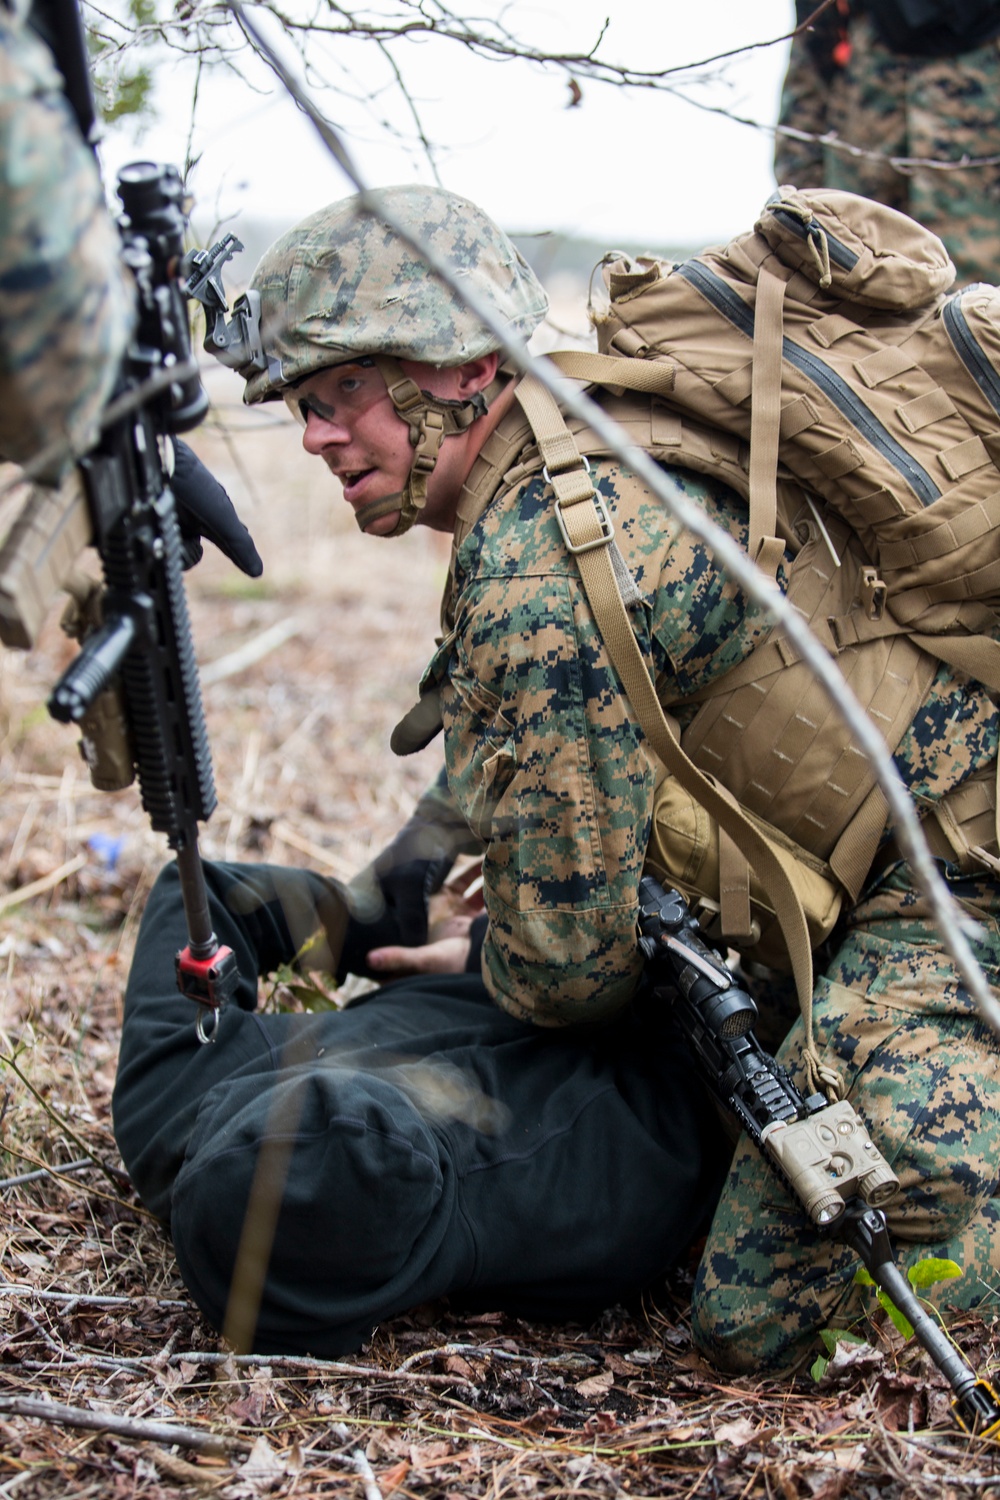 24th MEU increases TRAP expertise